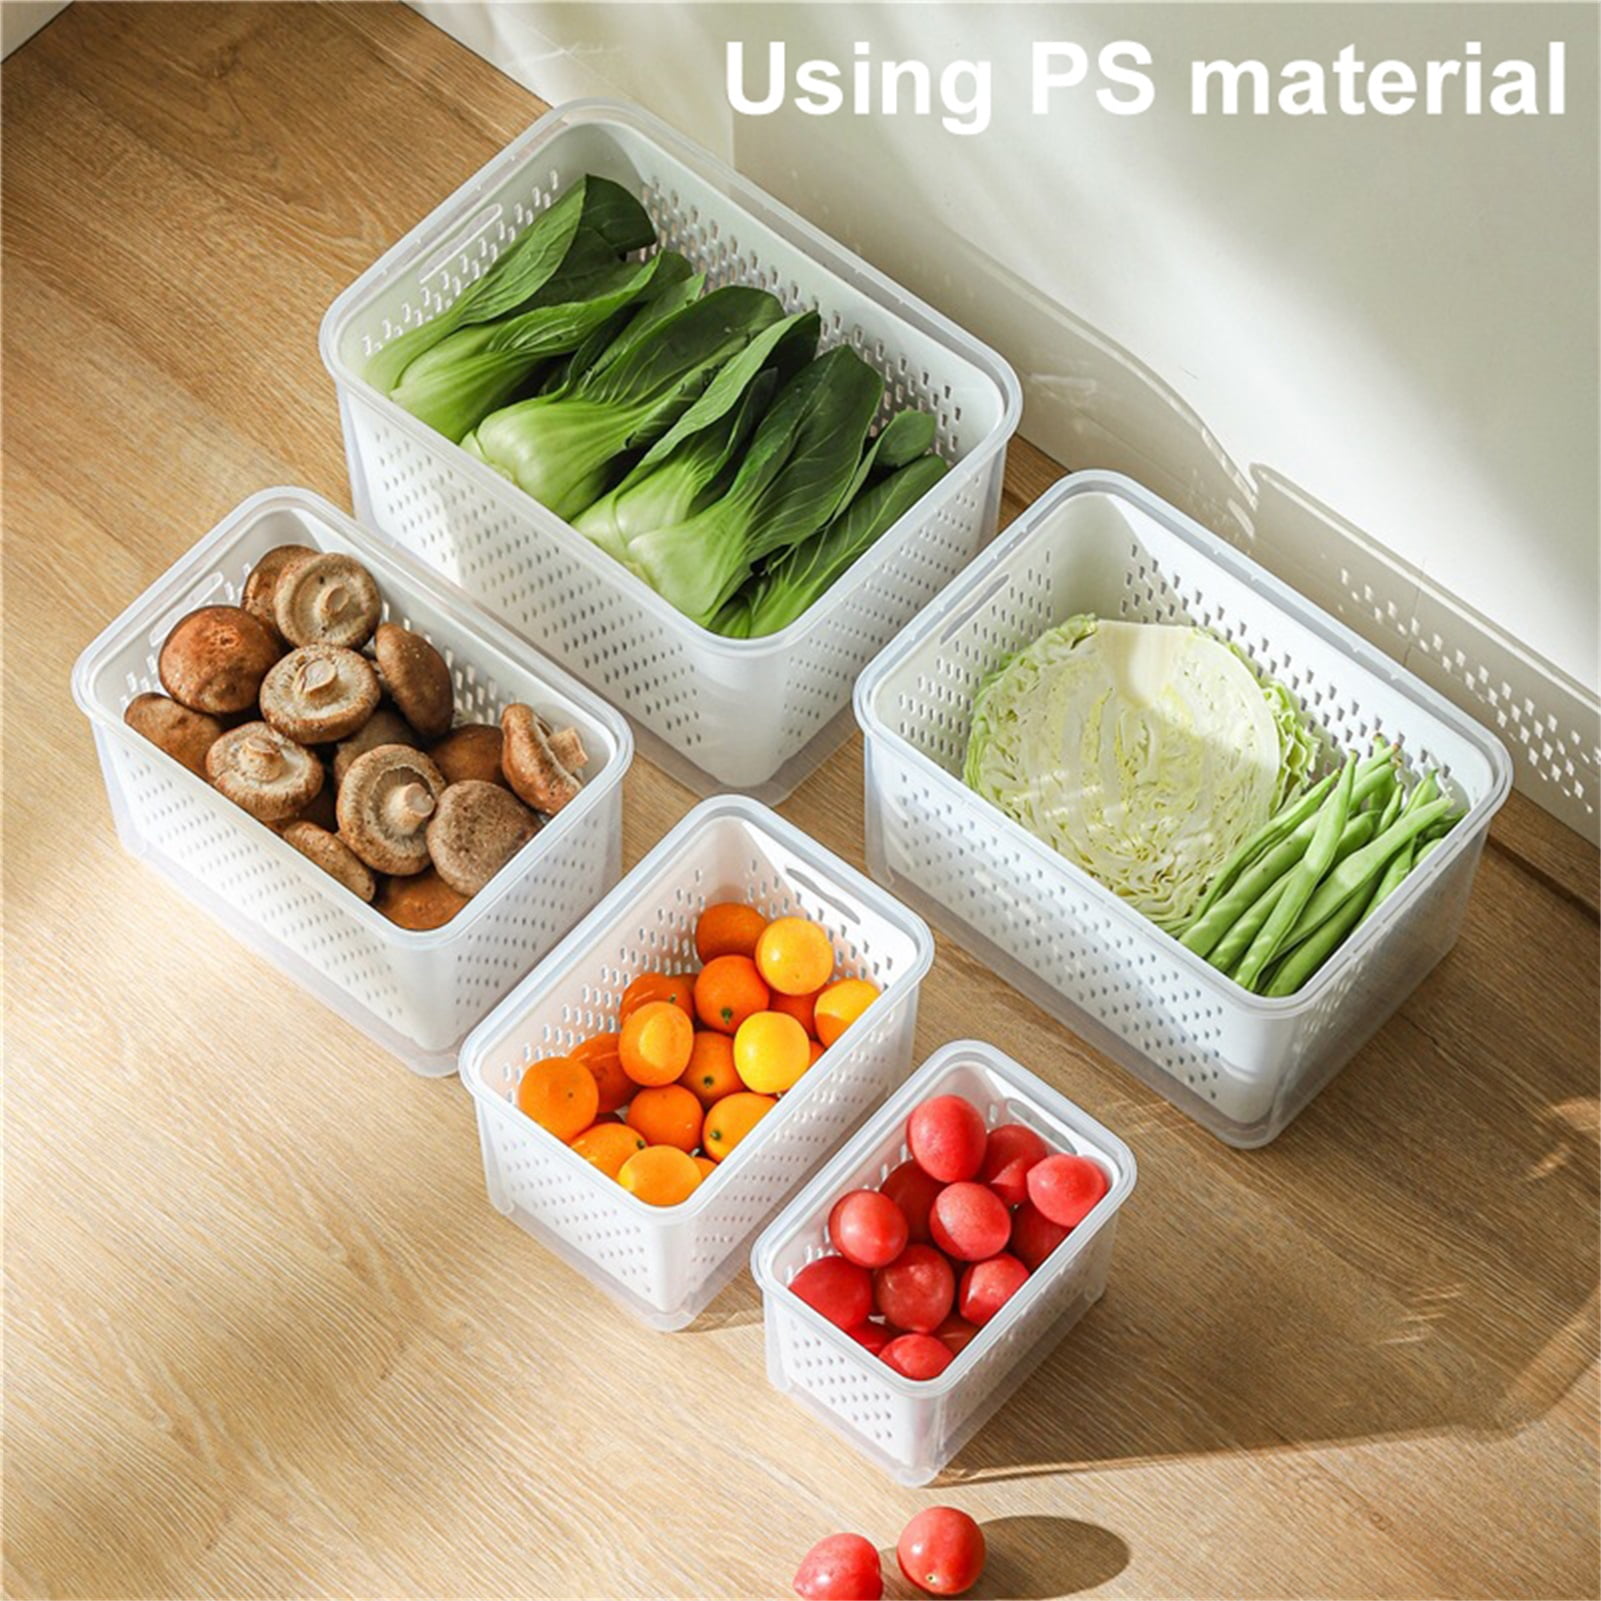 Large Plastic Food Storage Container with Lid, Casa Lingo Meal Prep Airtight Containers for Kitchen and Fridge, Set of 16 Pieces Plastic Food